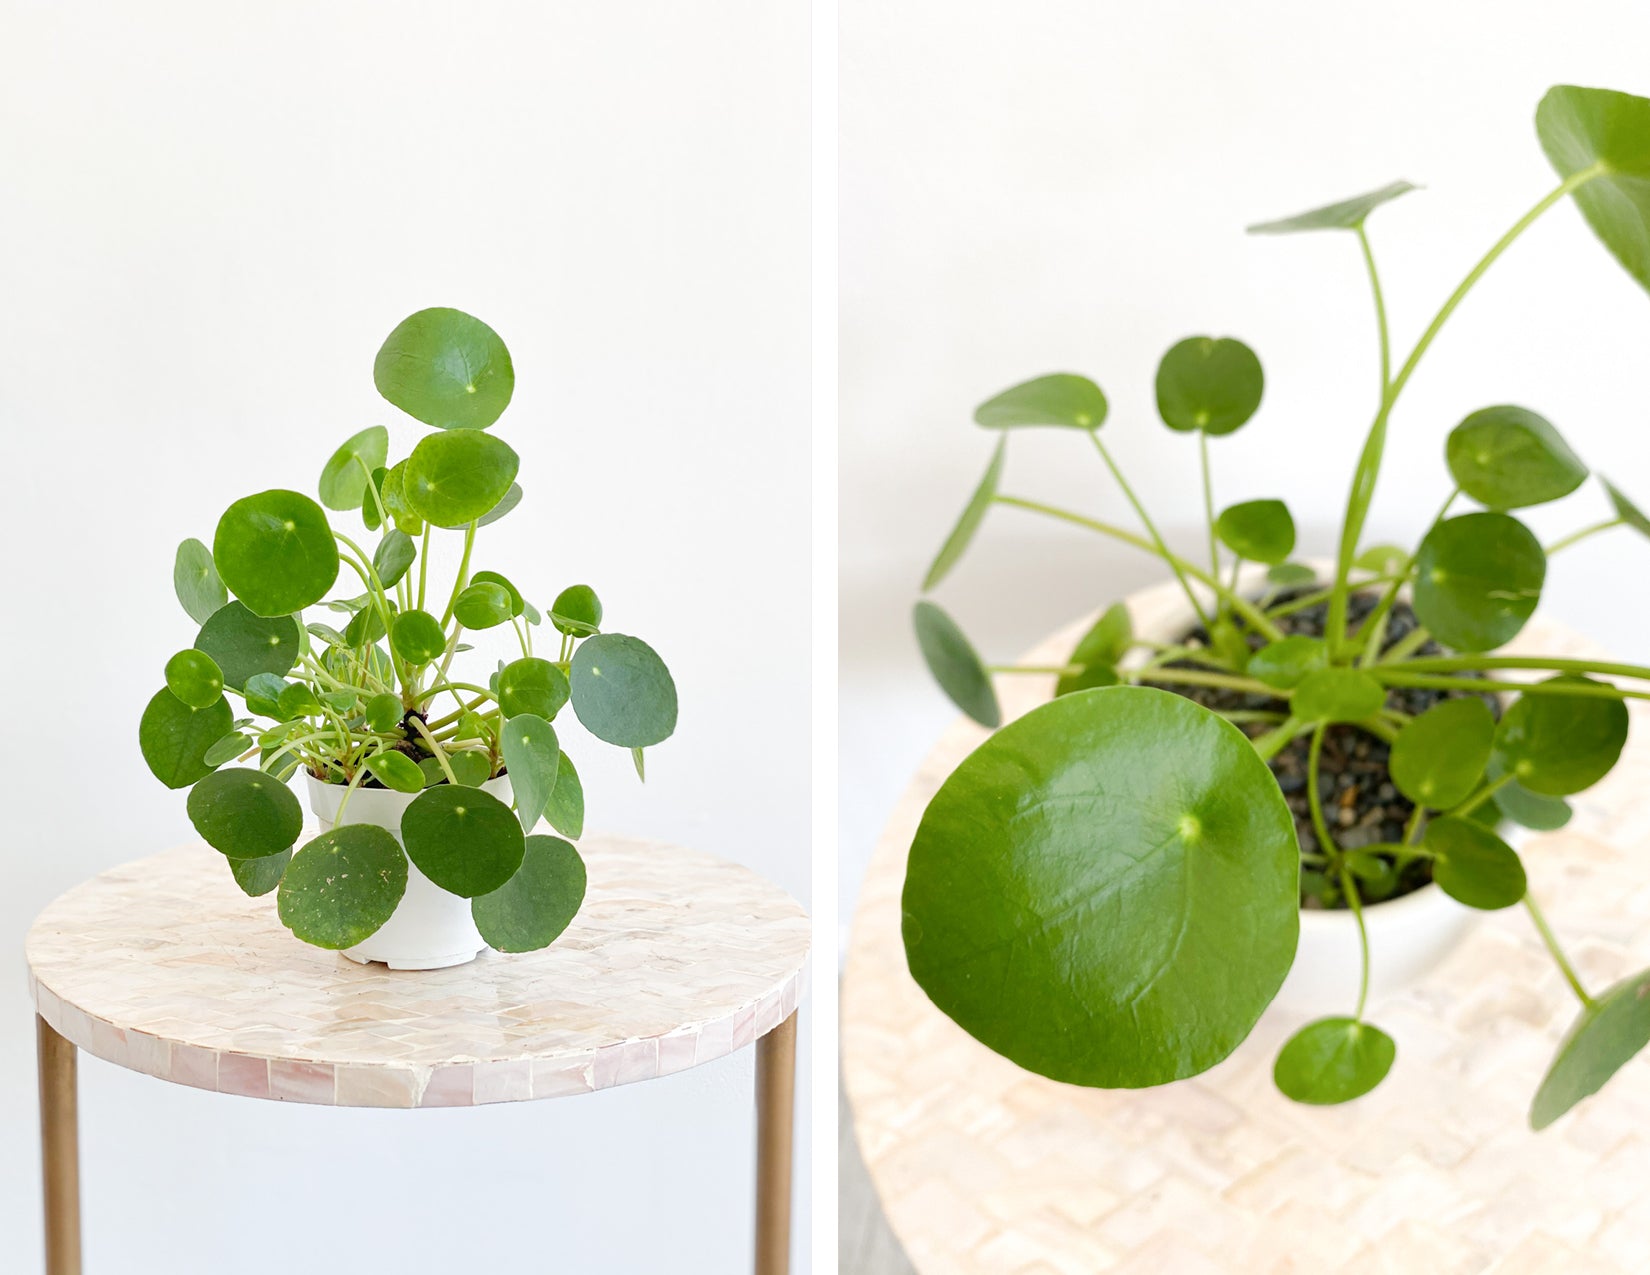 wildflora plant parenthood pilea peperomioides chinese money ufo lefse missionary green plant round circle leaves foliage care about light water sun how to